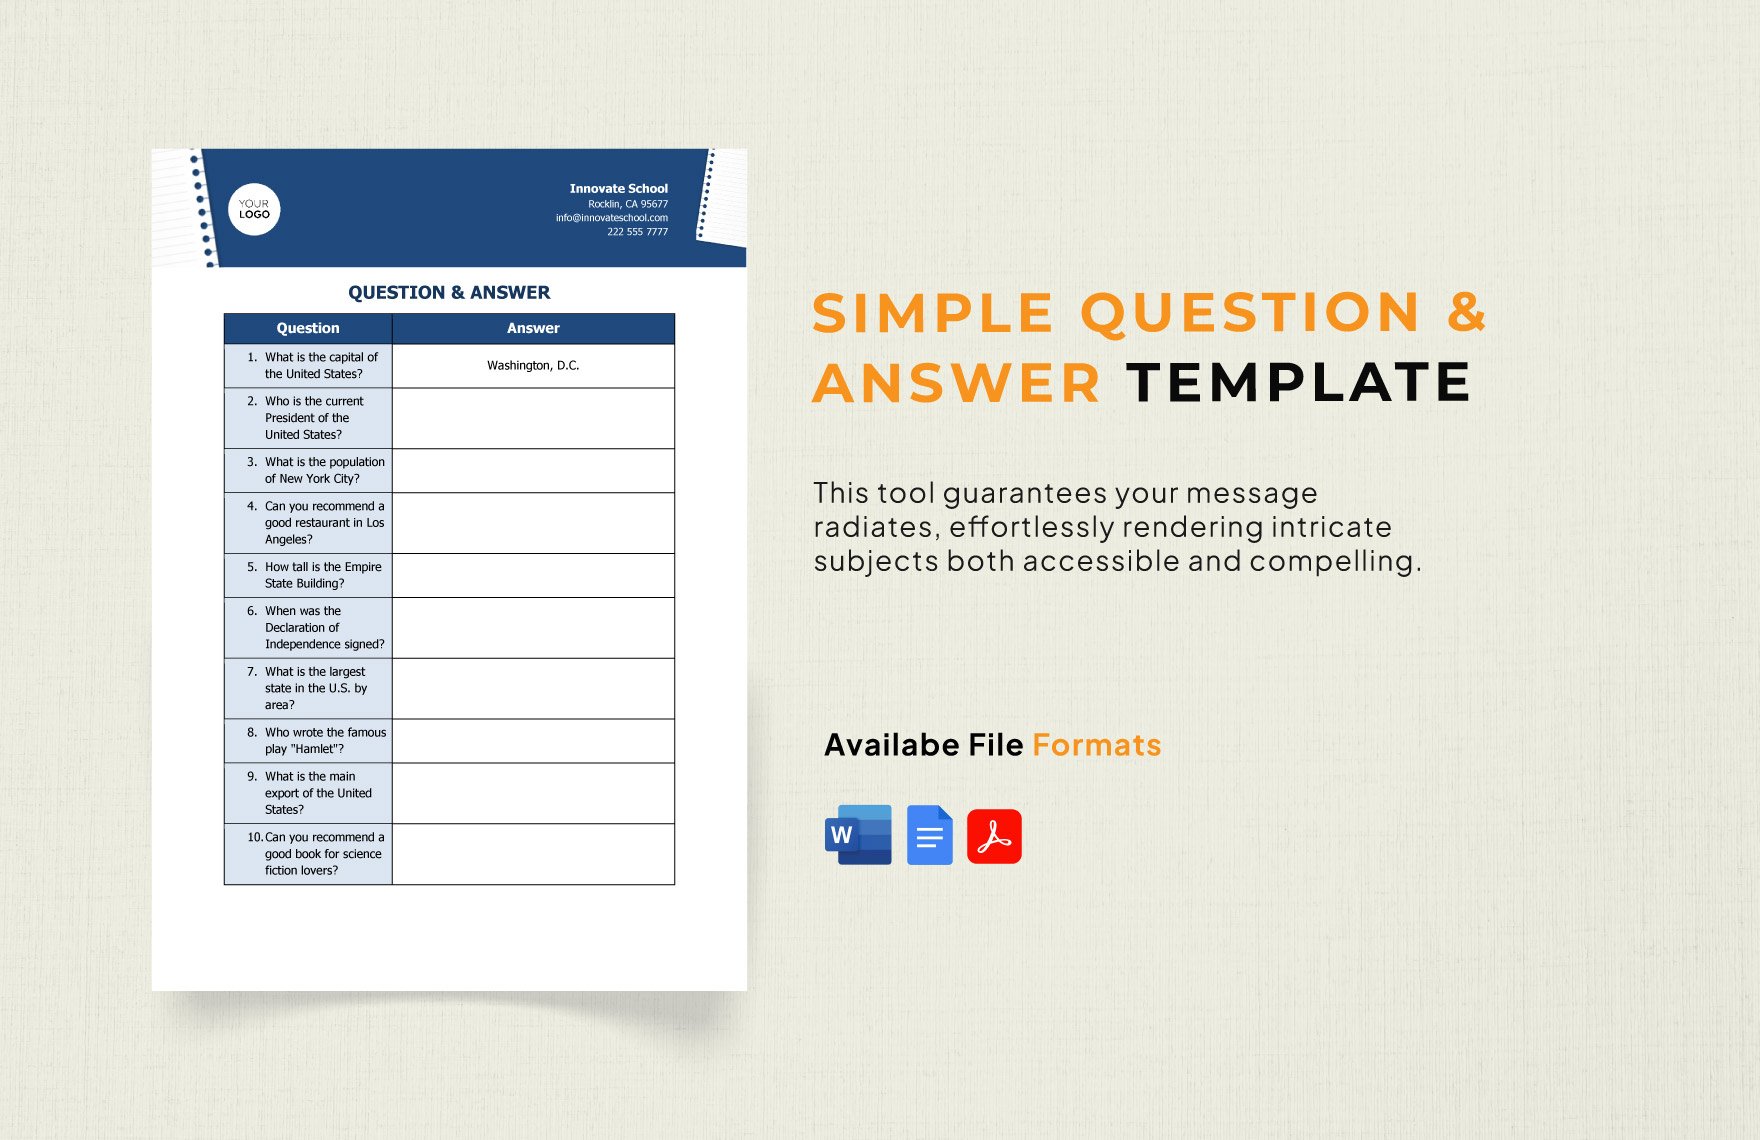 Simple Question & Answer Template